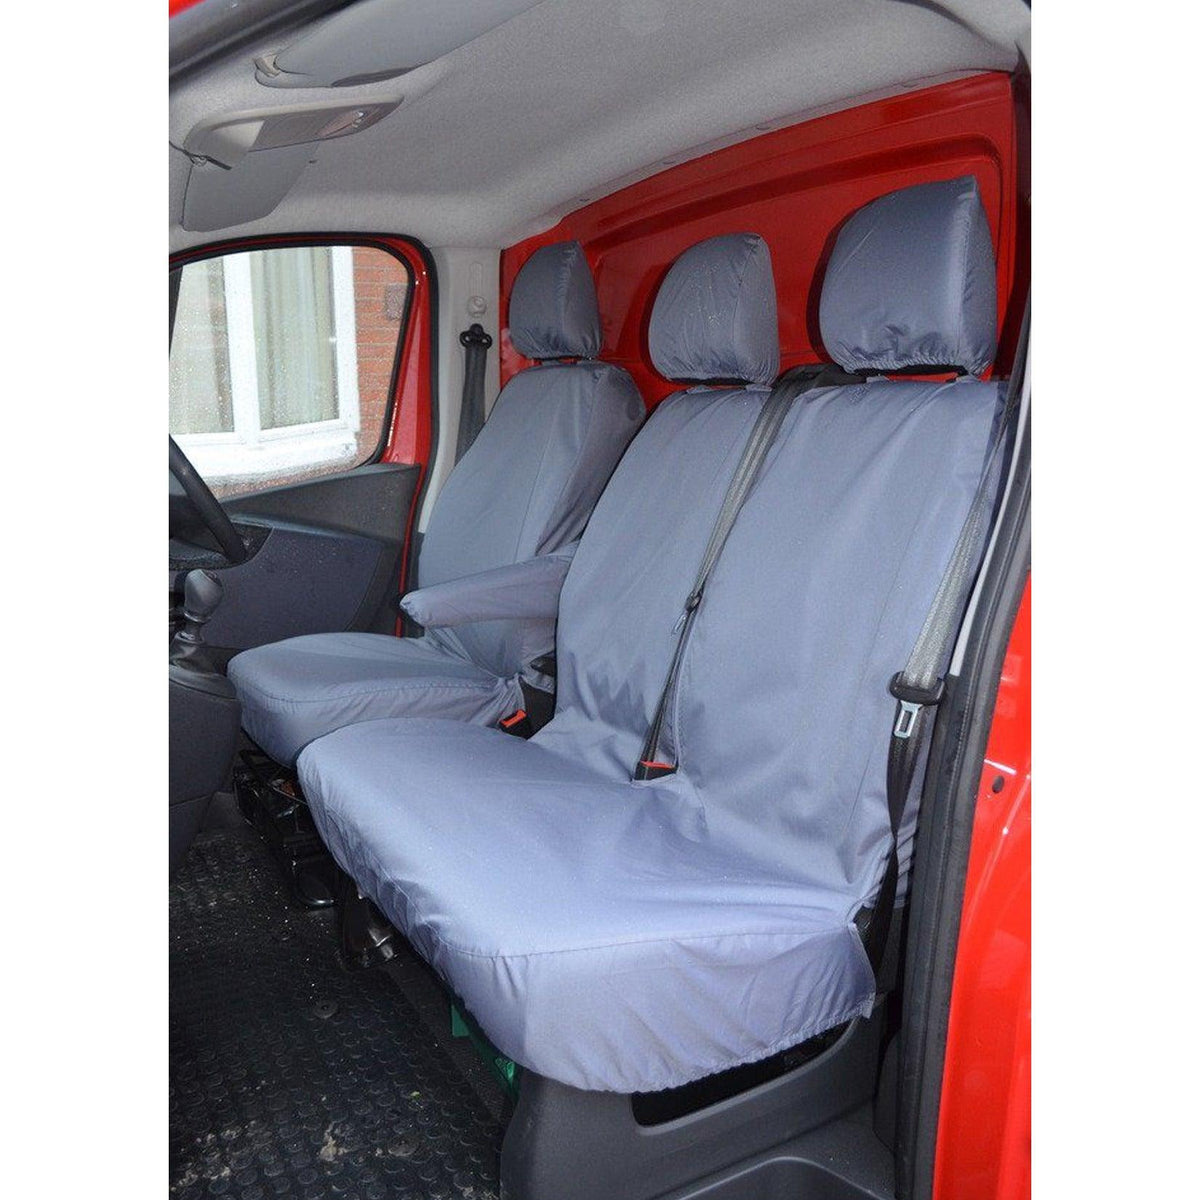 VAUXHALL VIVARO 2014-2019 BASE MODEL DRIVER AND FRONT DOUBLE PASSENGER SEAT COVERS - GREY - Storm Xccessories2